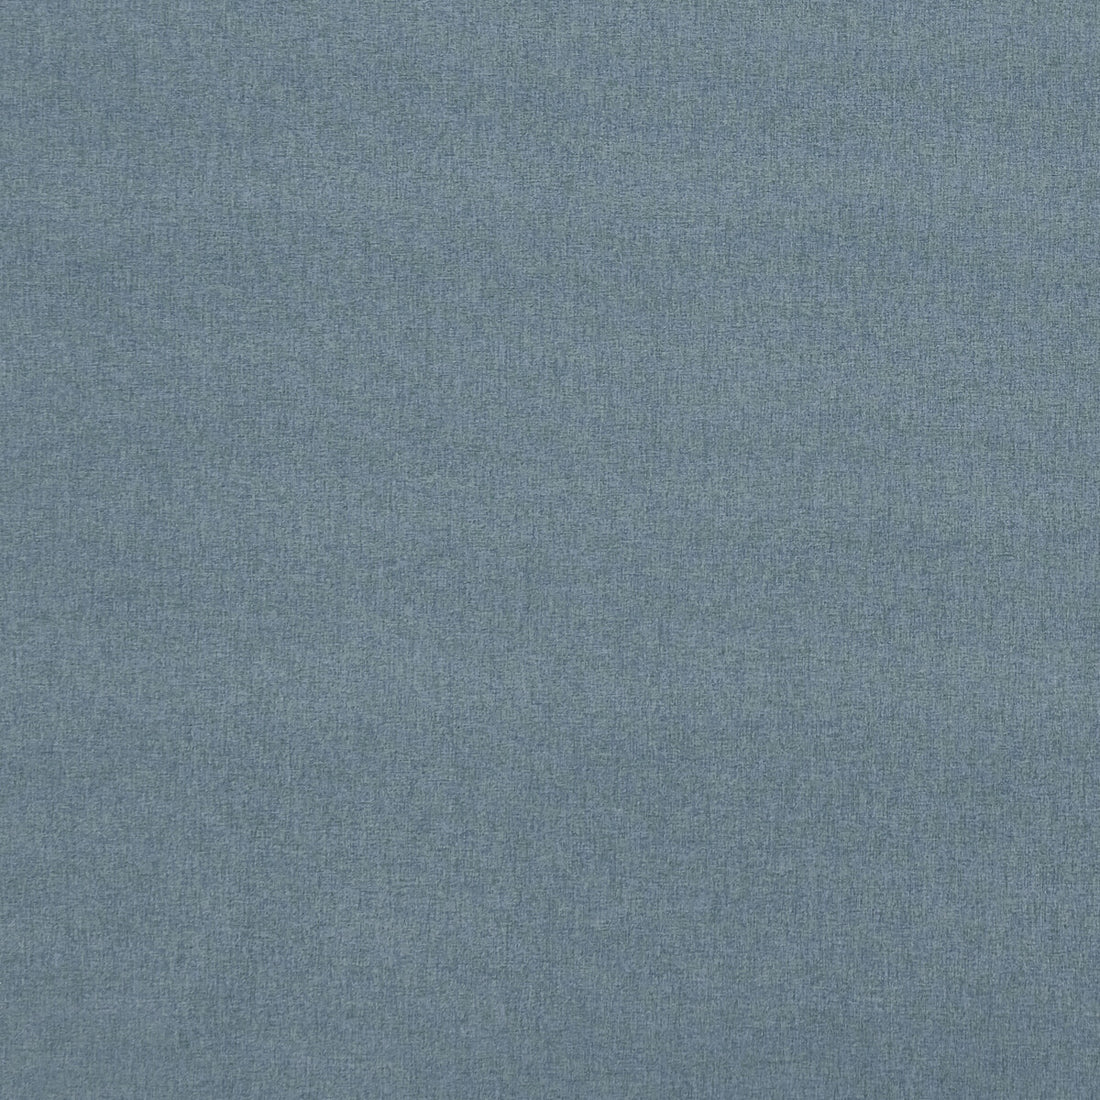 Highlander fabric in aegean color - pattern F0848/29.CAC.0 - by Clarke And Clarke in the Clarke &amp; Clarke Highlander 2 collection